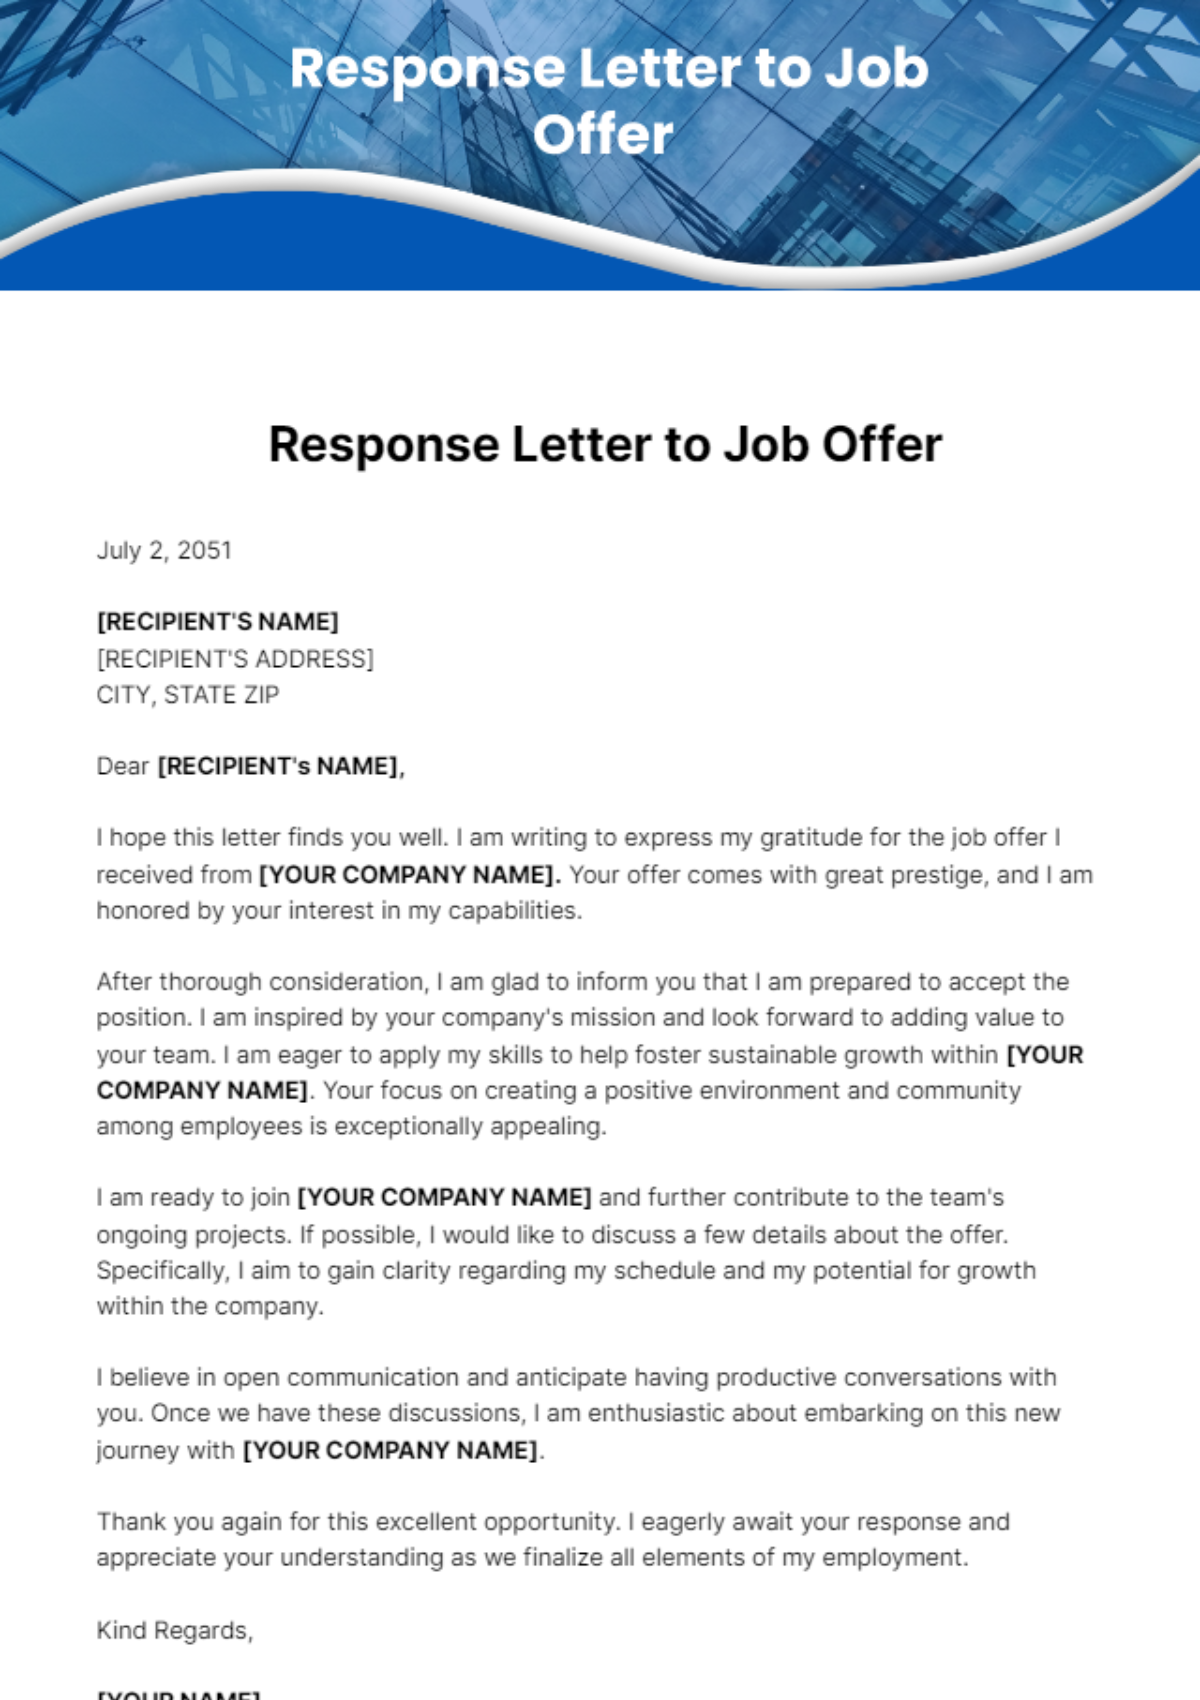 Free Response Letter to Job Offer Template